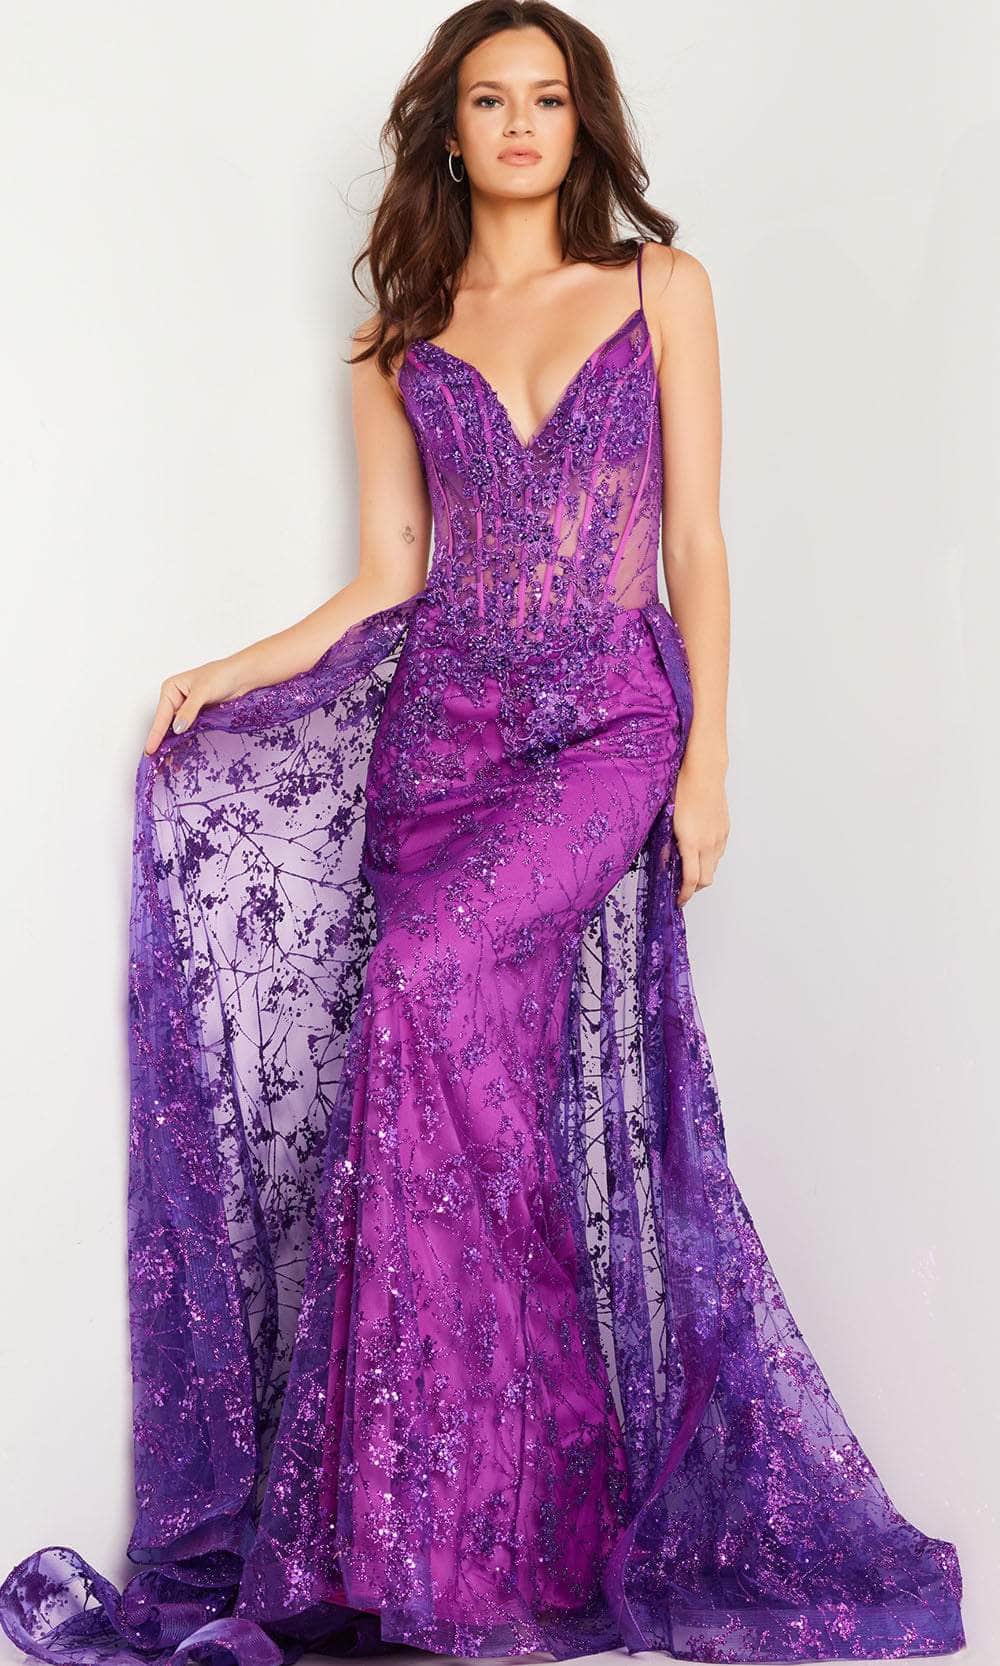 Jovani 23530 - Embellished Tulle Prom Dress with Overskirt Special Occasion Dress 00 / Amethyst